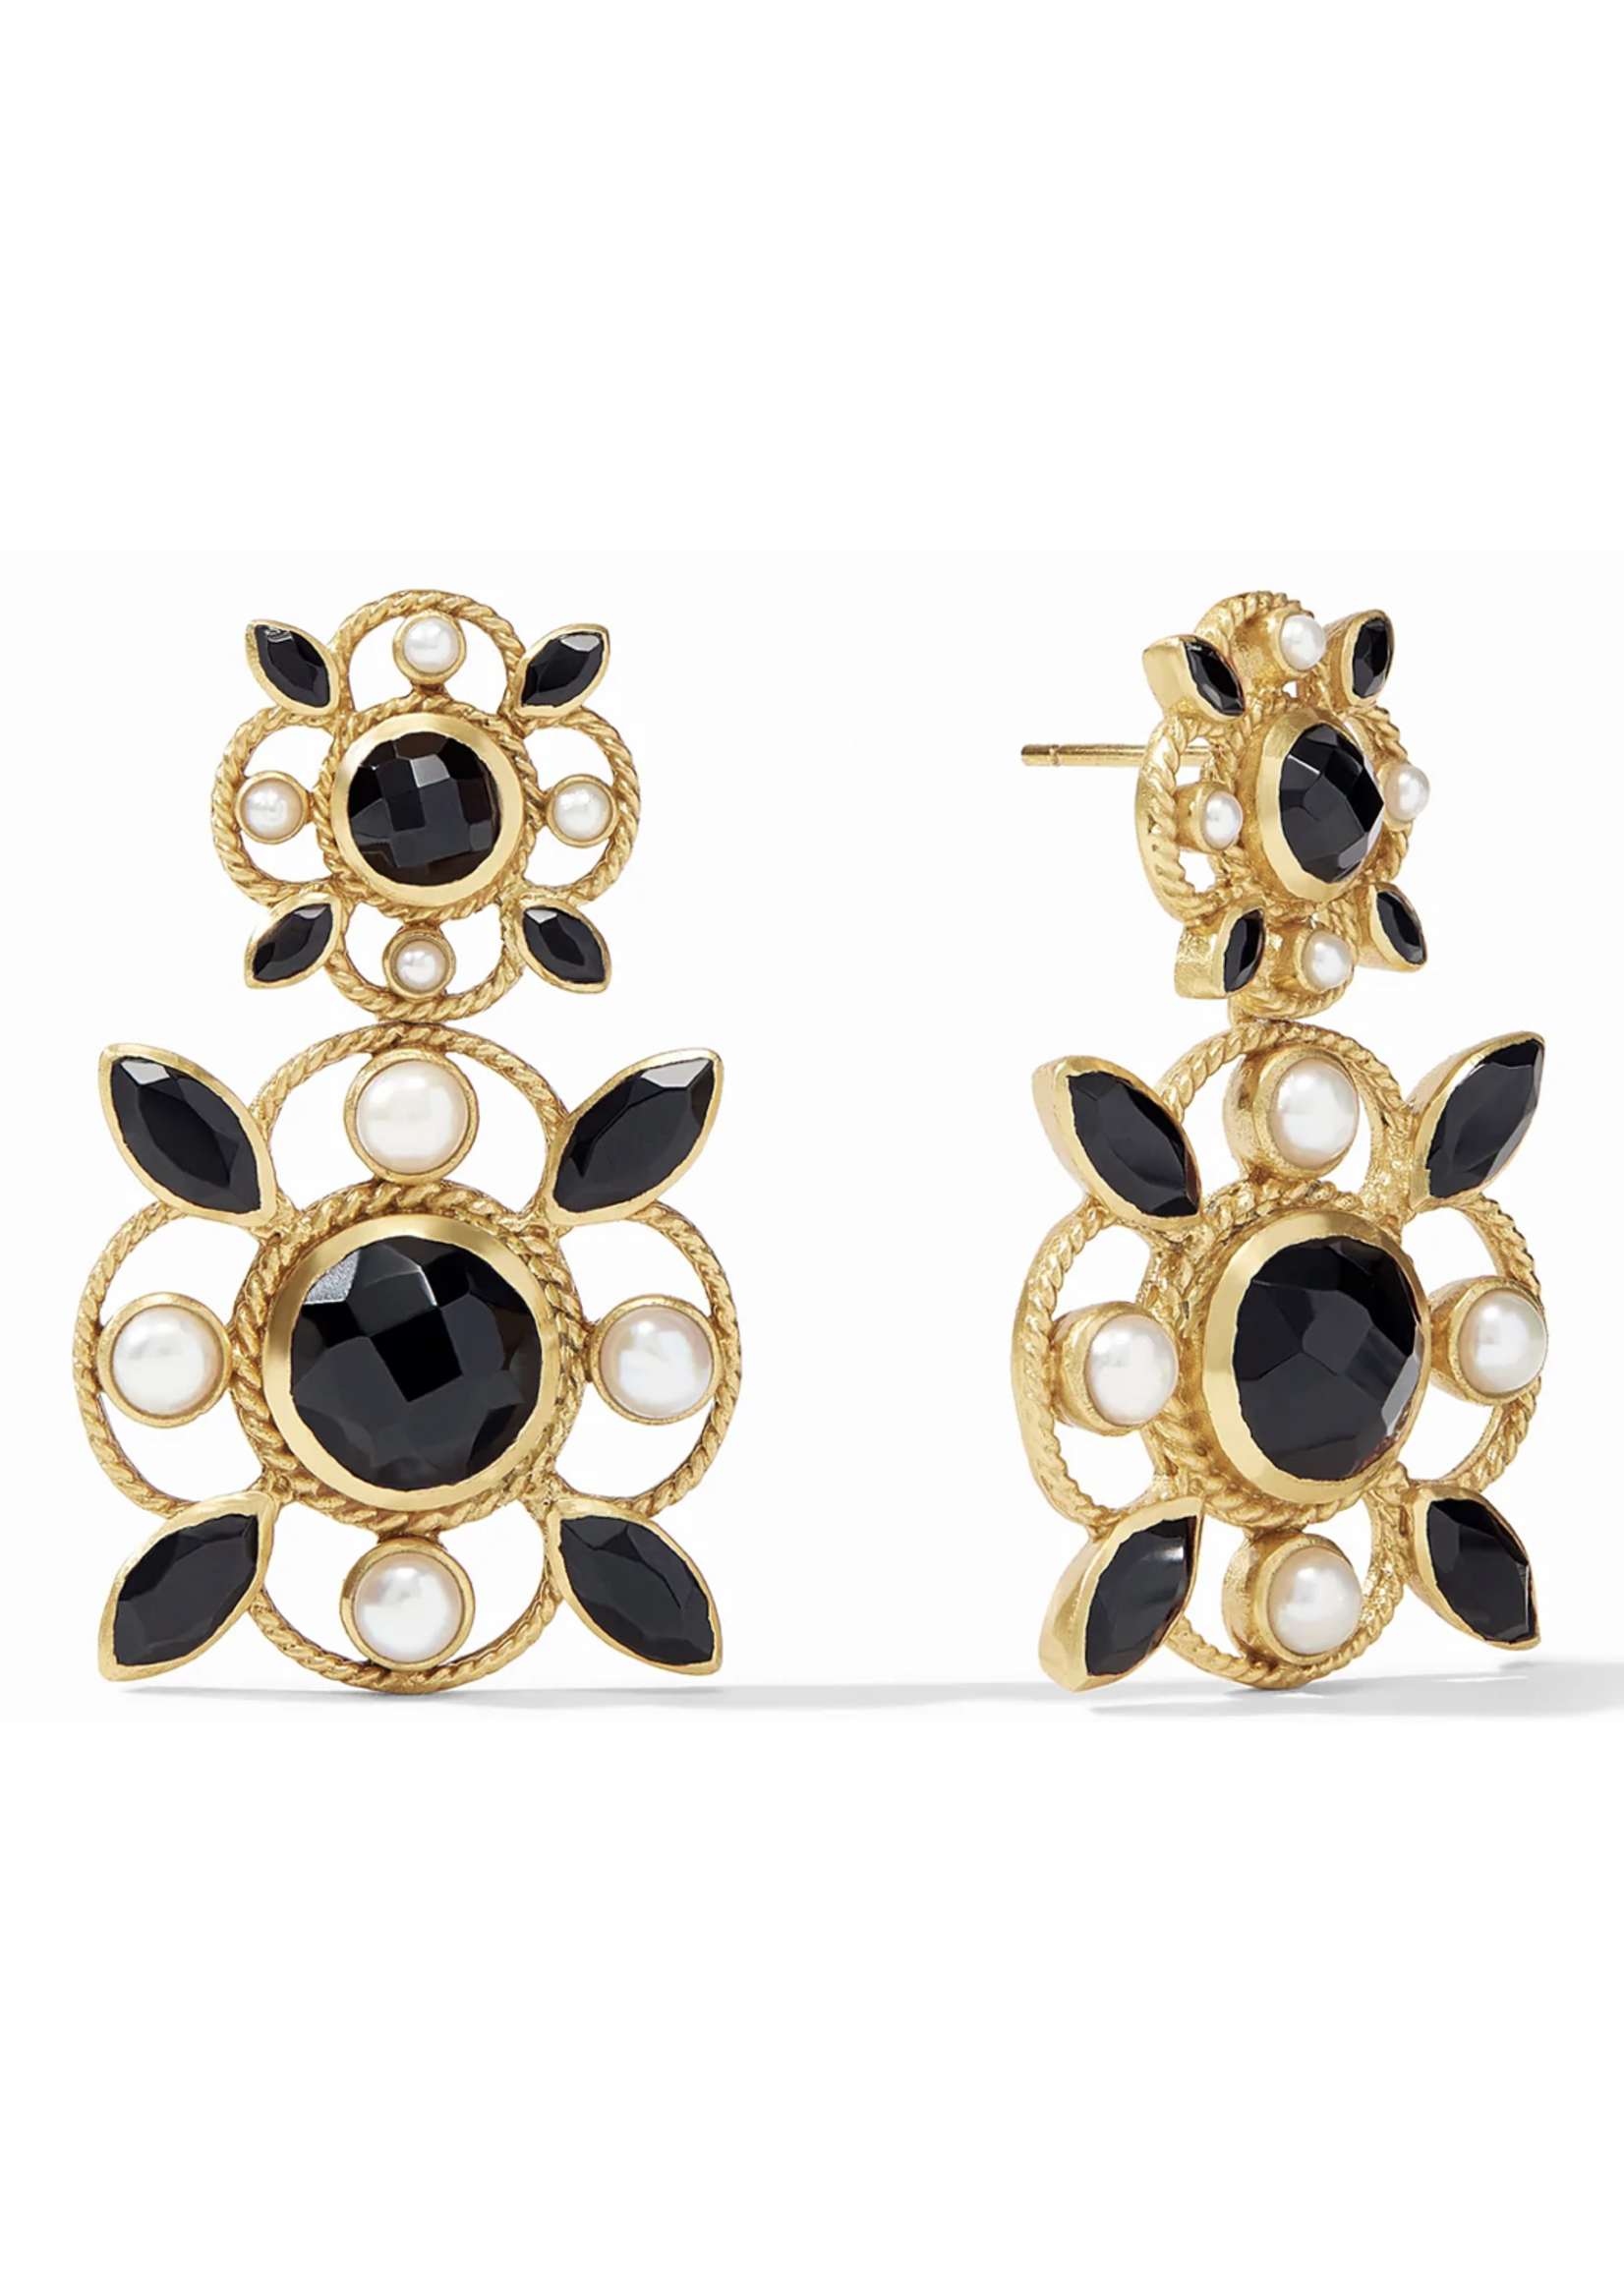 Julie Vos Manaco Statement Earring Gold Obsidian Black and Pearl Accents